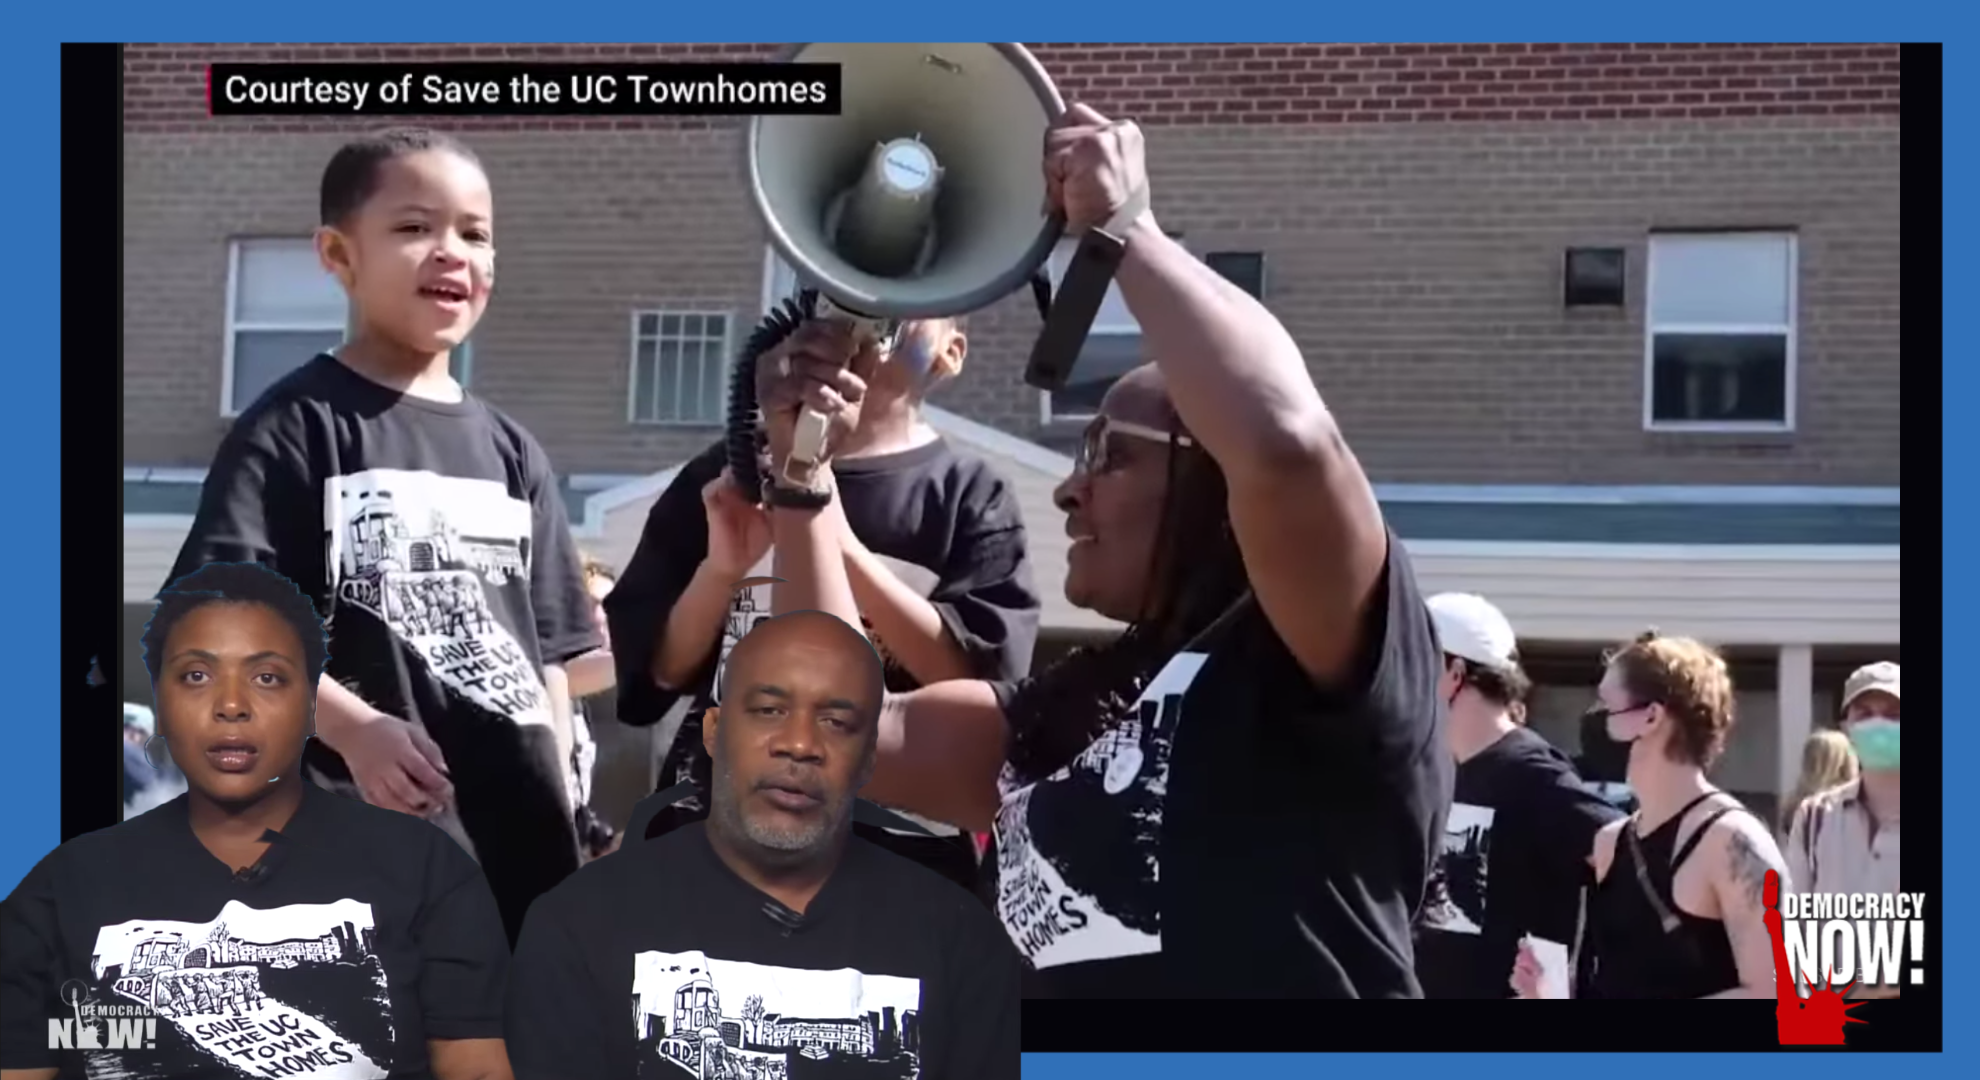 Philly Residents Organize to Block Evictions in University City Townhomes & Save Affordable Housing